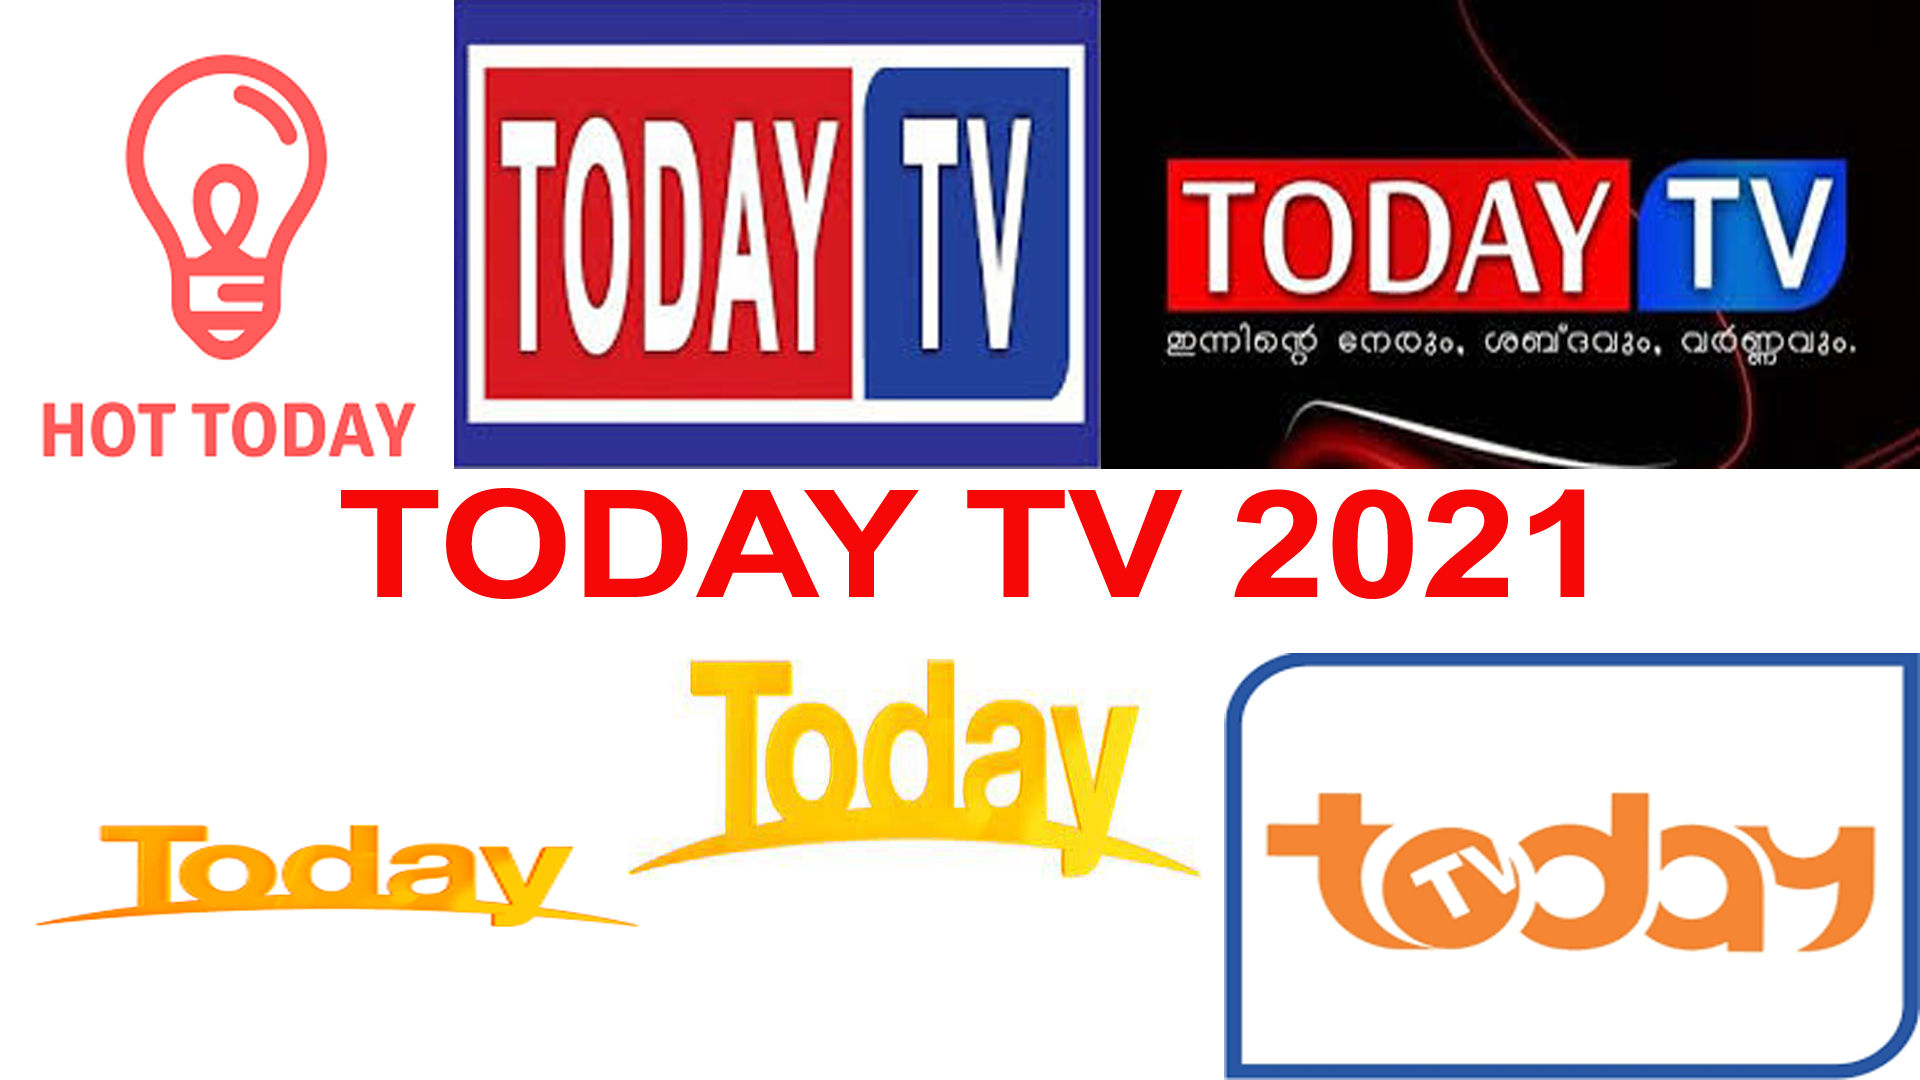 Today TV 2021